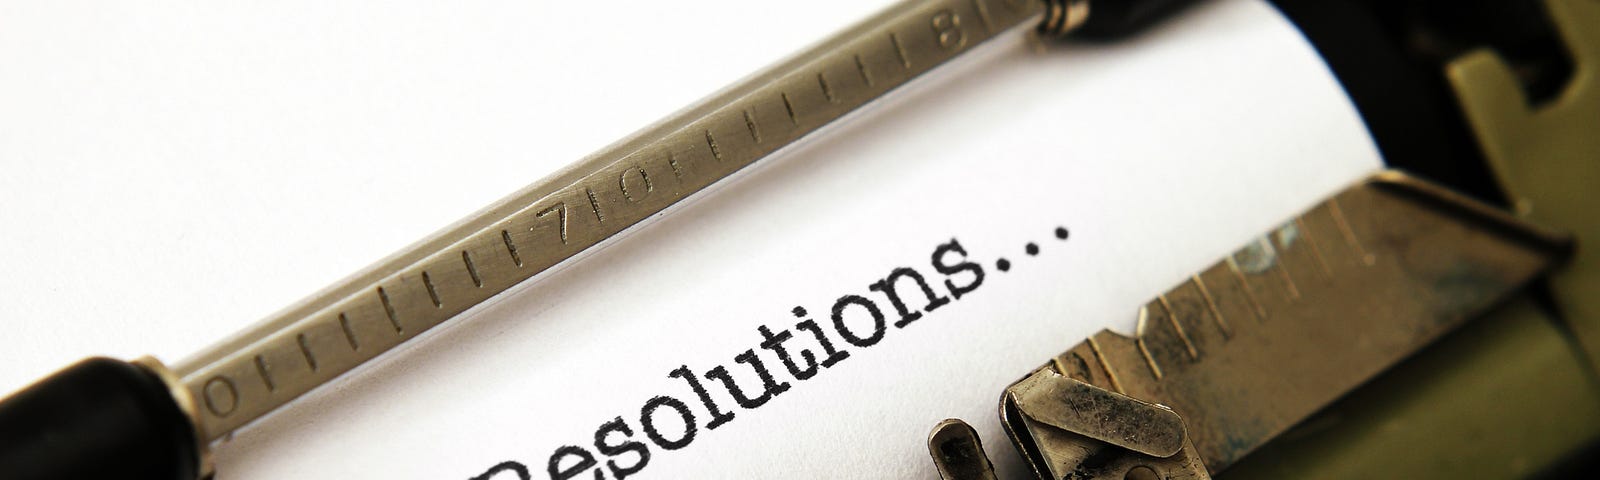 A typewriter with a piece of paper that has the text “Resolutions…” on it. (quotes, quotations, New Year’s, New Year’s resolutions)